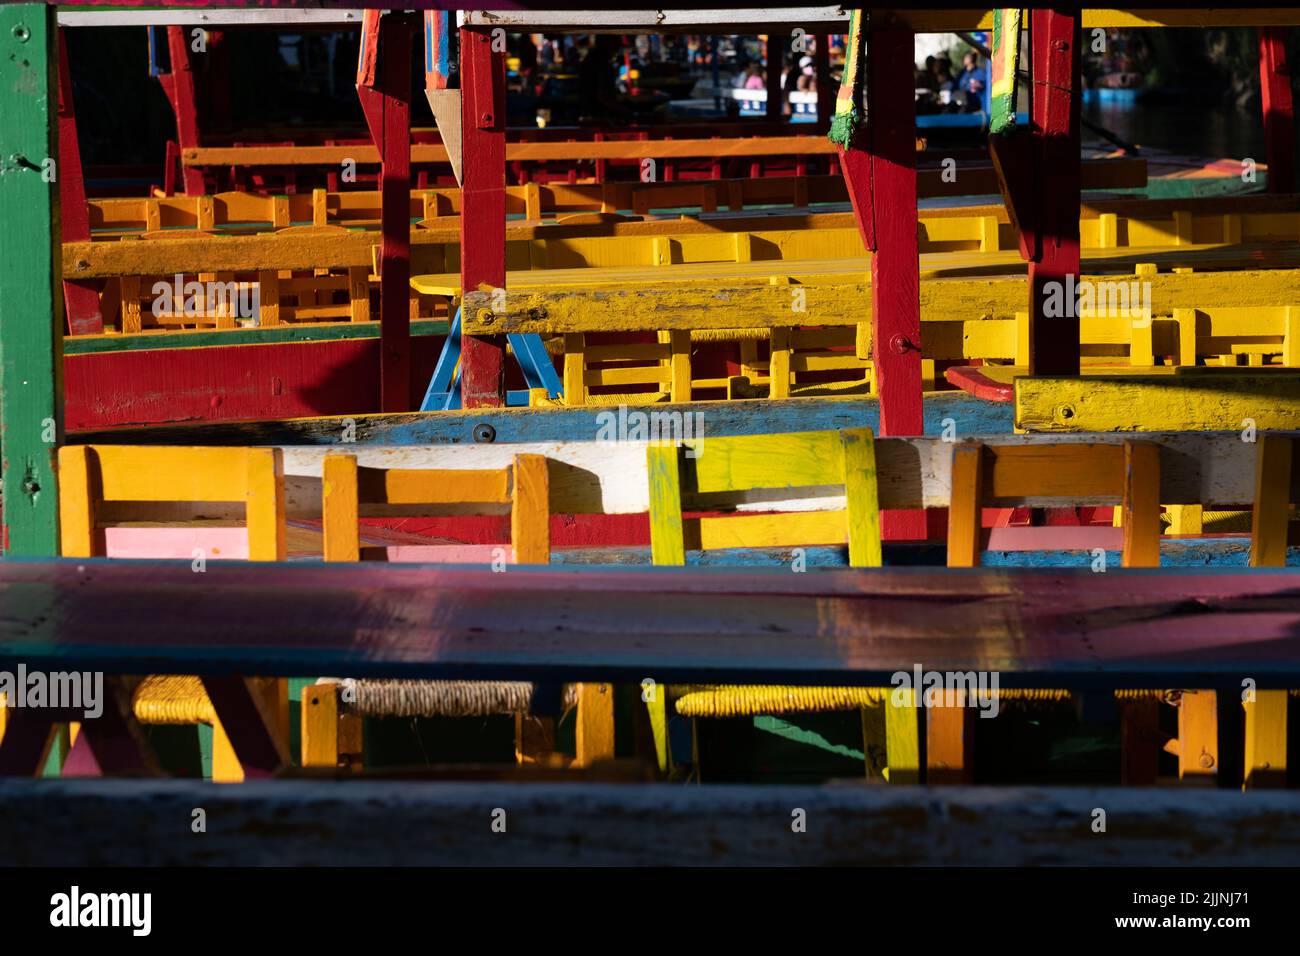 Distinctive yellow chairs of the trajinera boats the travel the canals of Xochimilco in Mexico City. Stock Photo